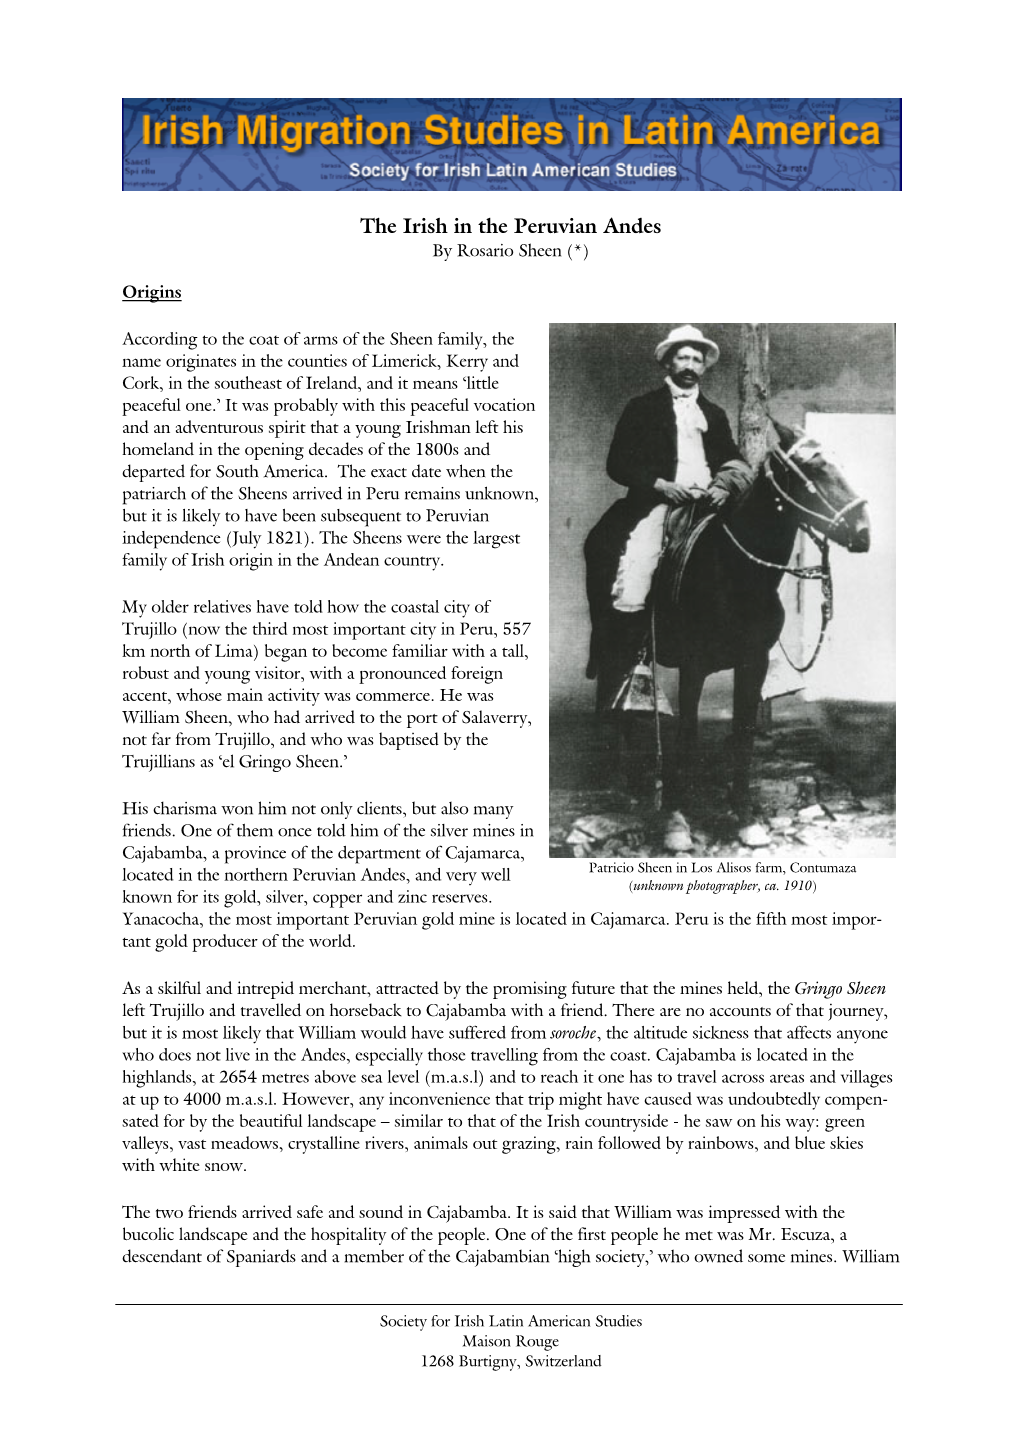 The Irish in the Peruvian Andes by Rosario Sheen (*)